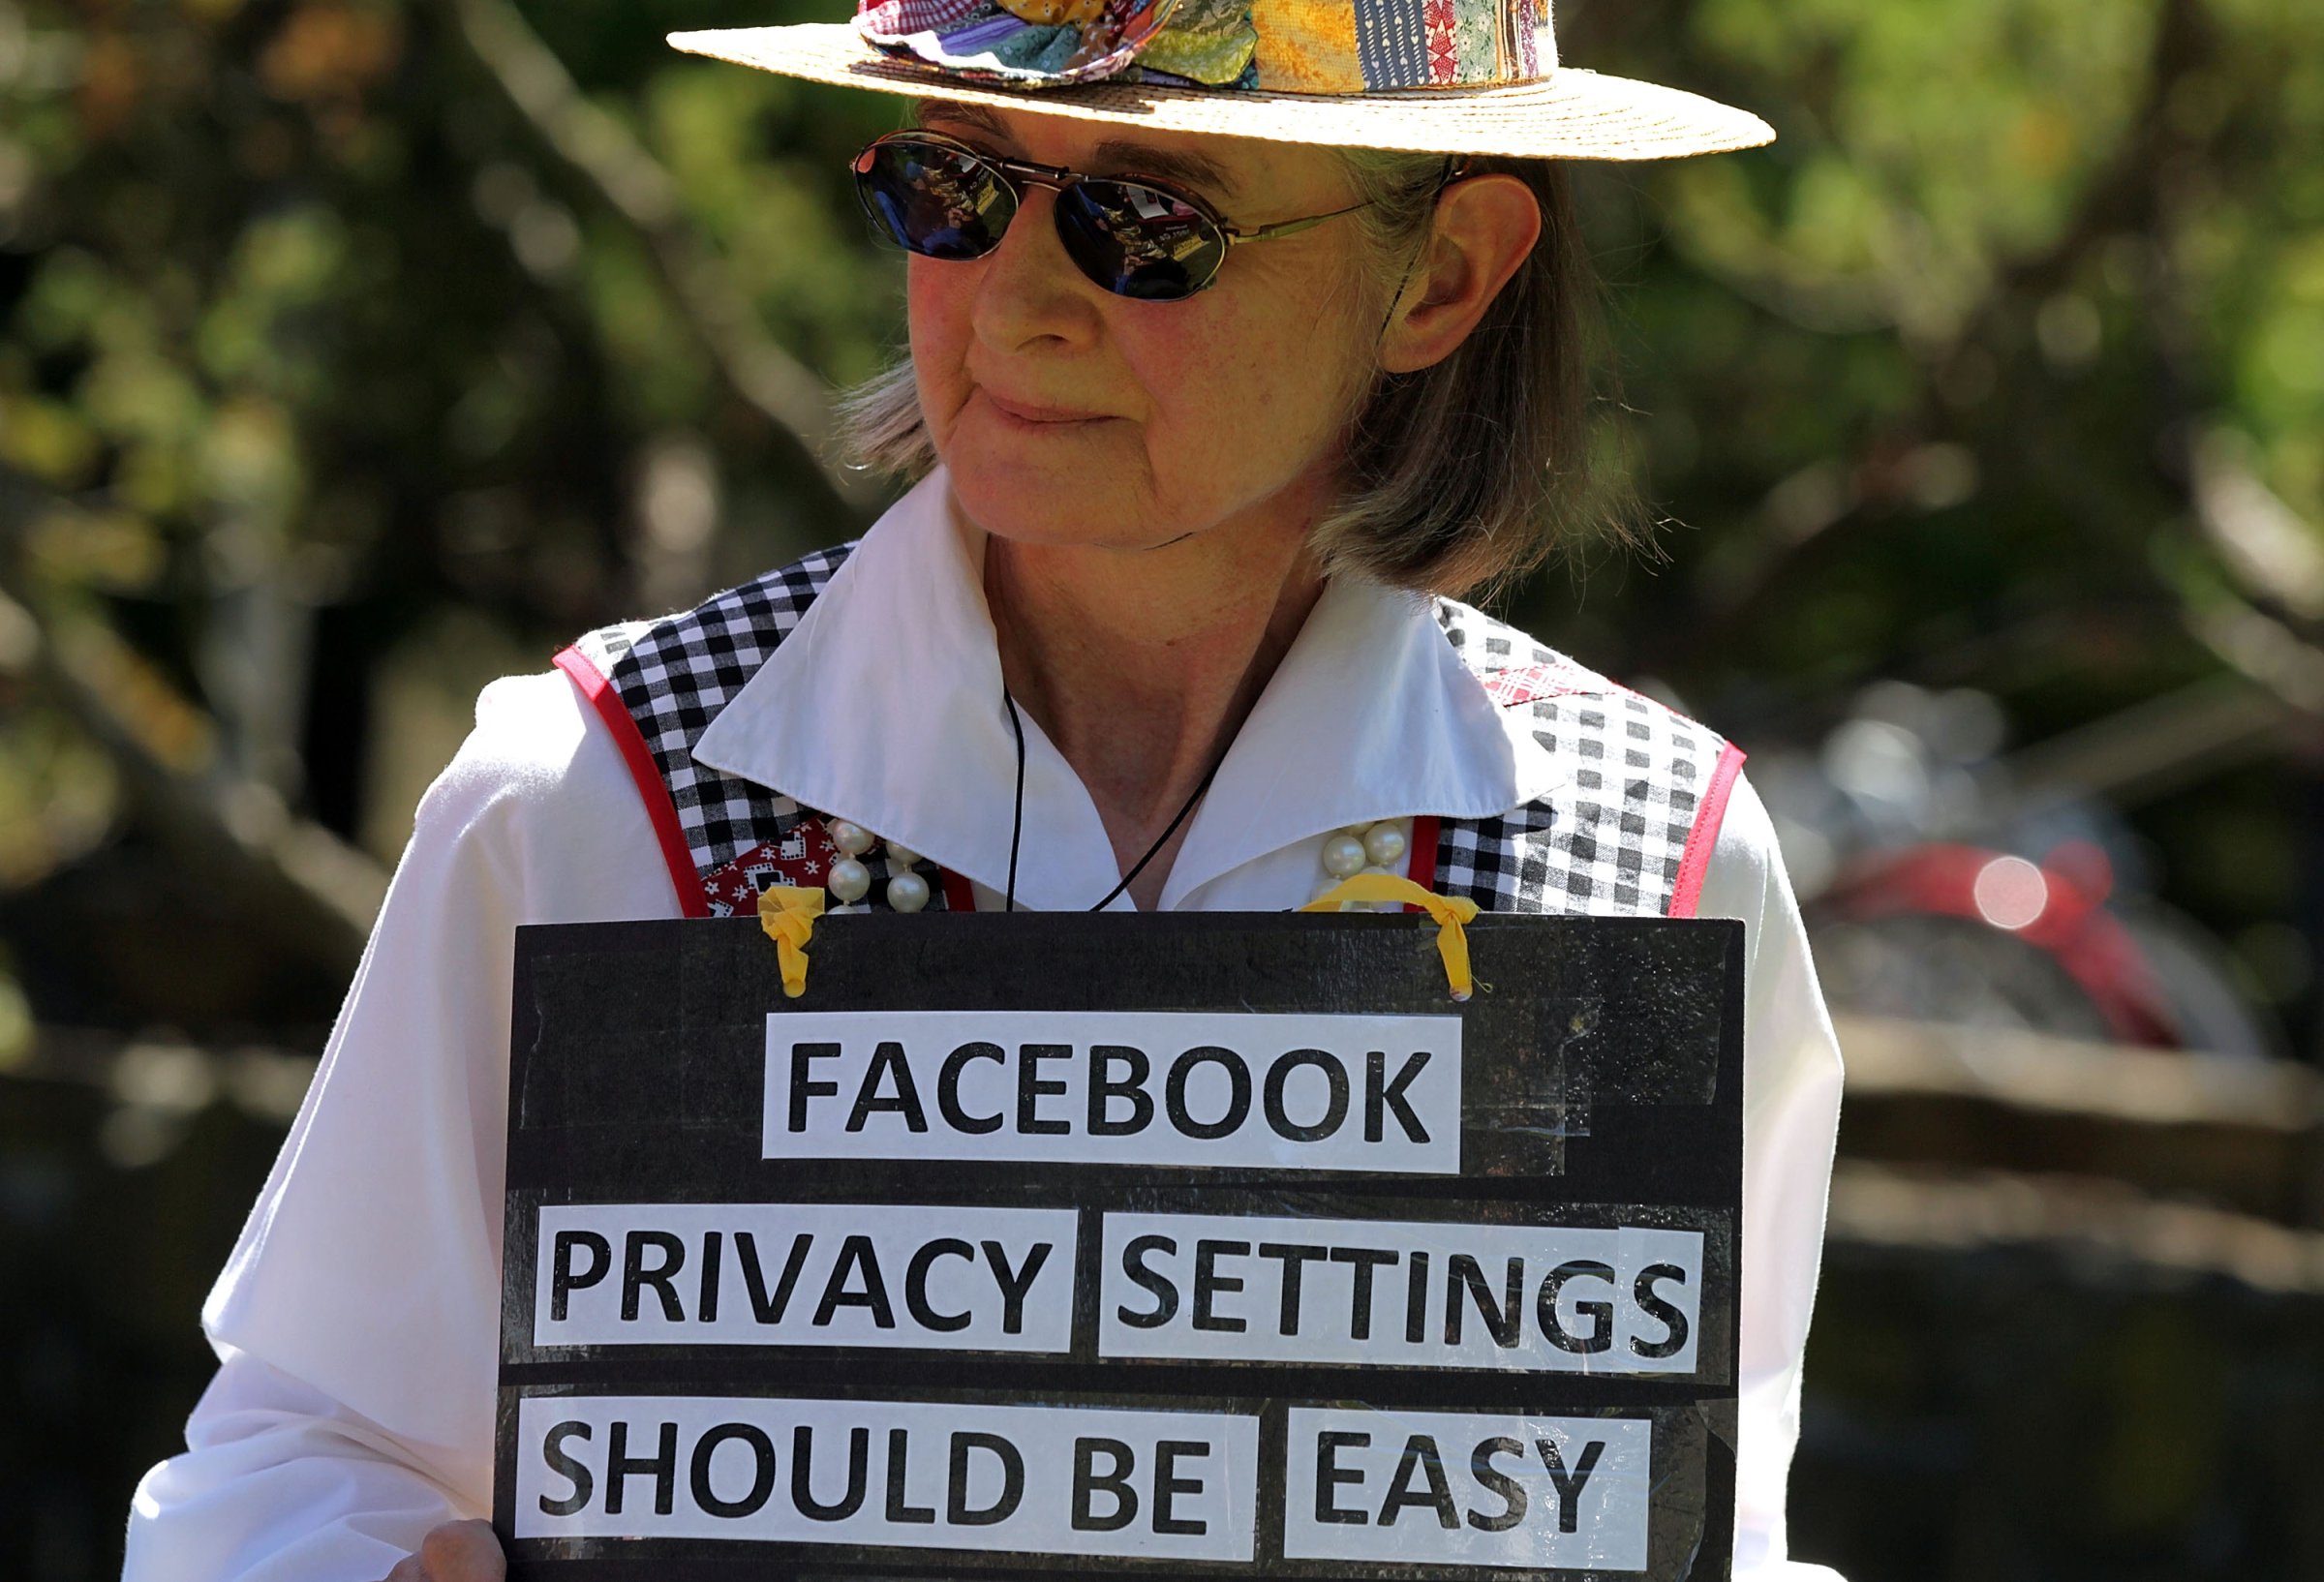 Demonstration Held Against Facebook's Privacy Policies